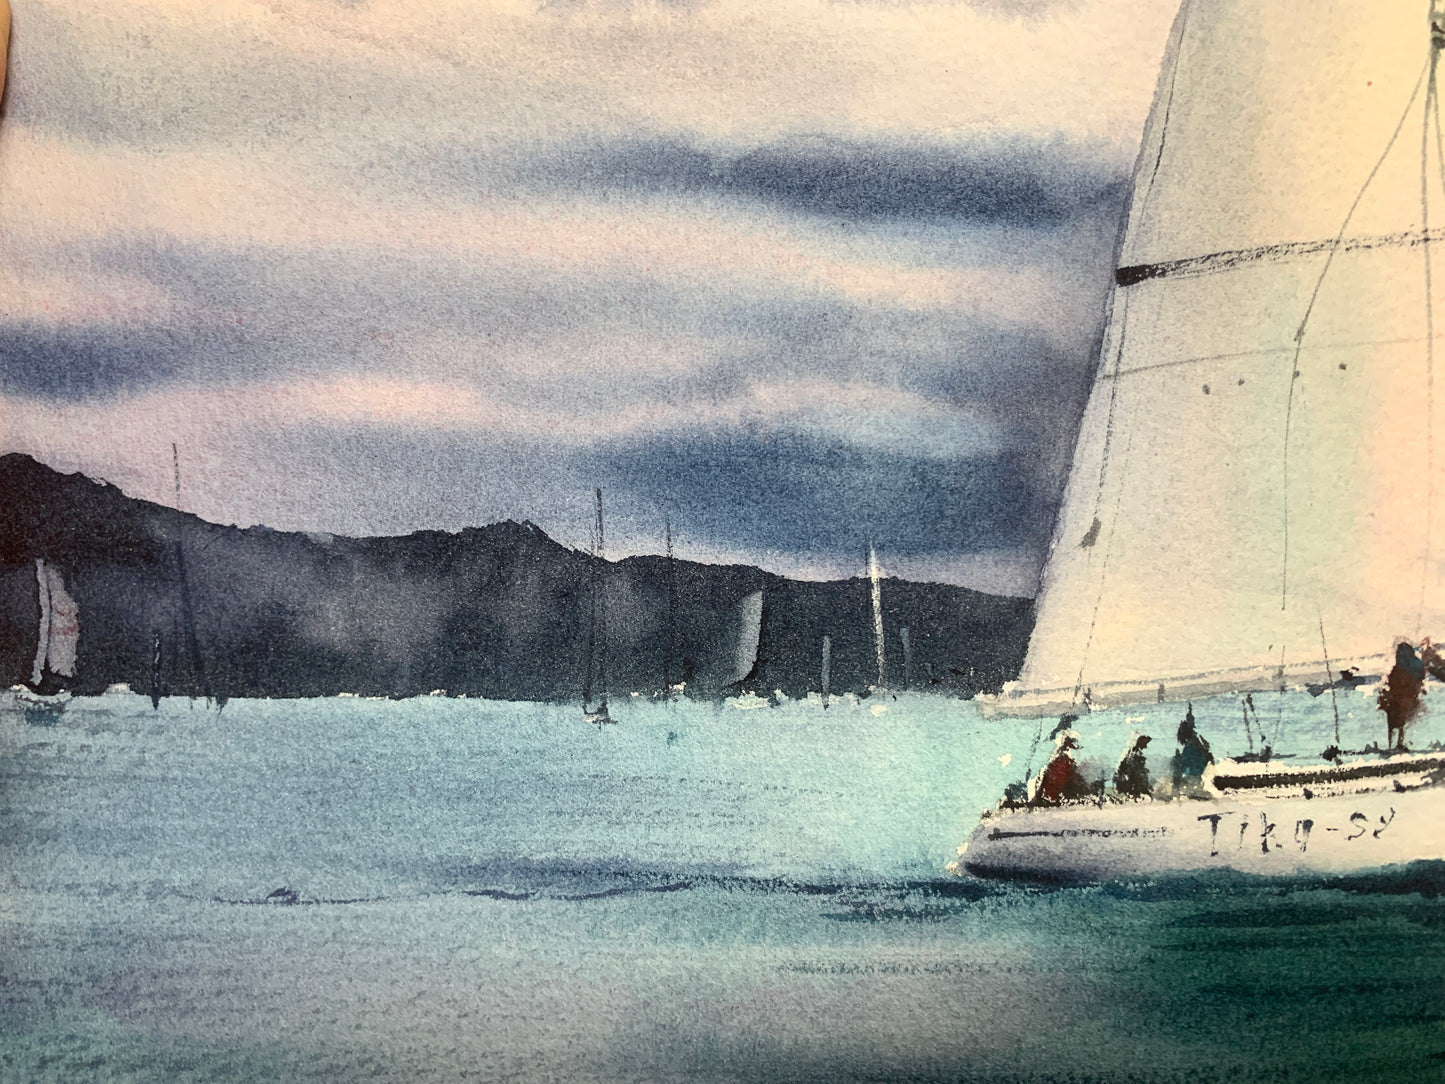 Ocean Yacht Painting Watercolor Original - Tailwinds #3 - 15x22in